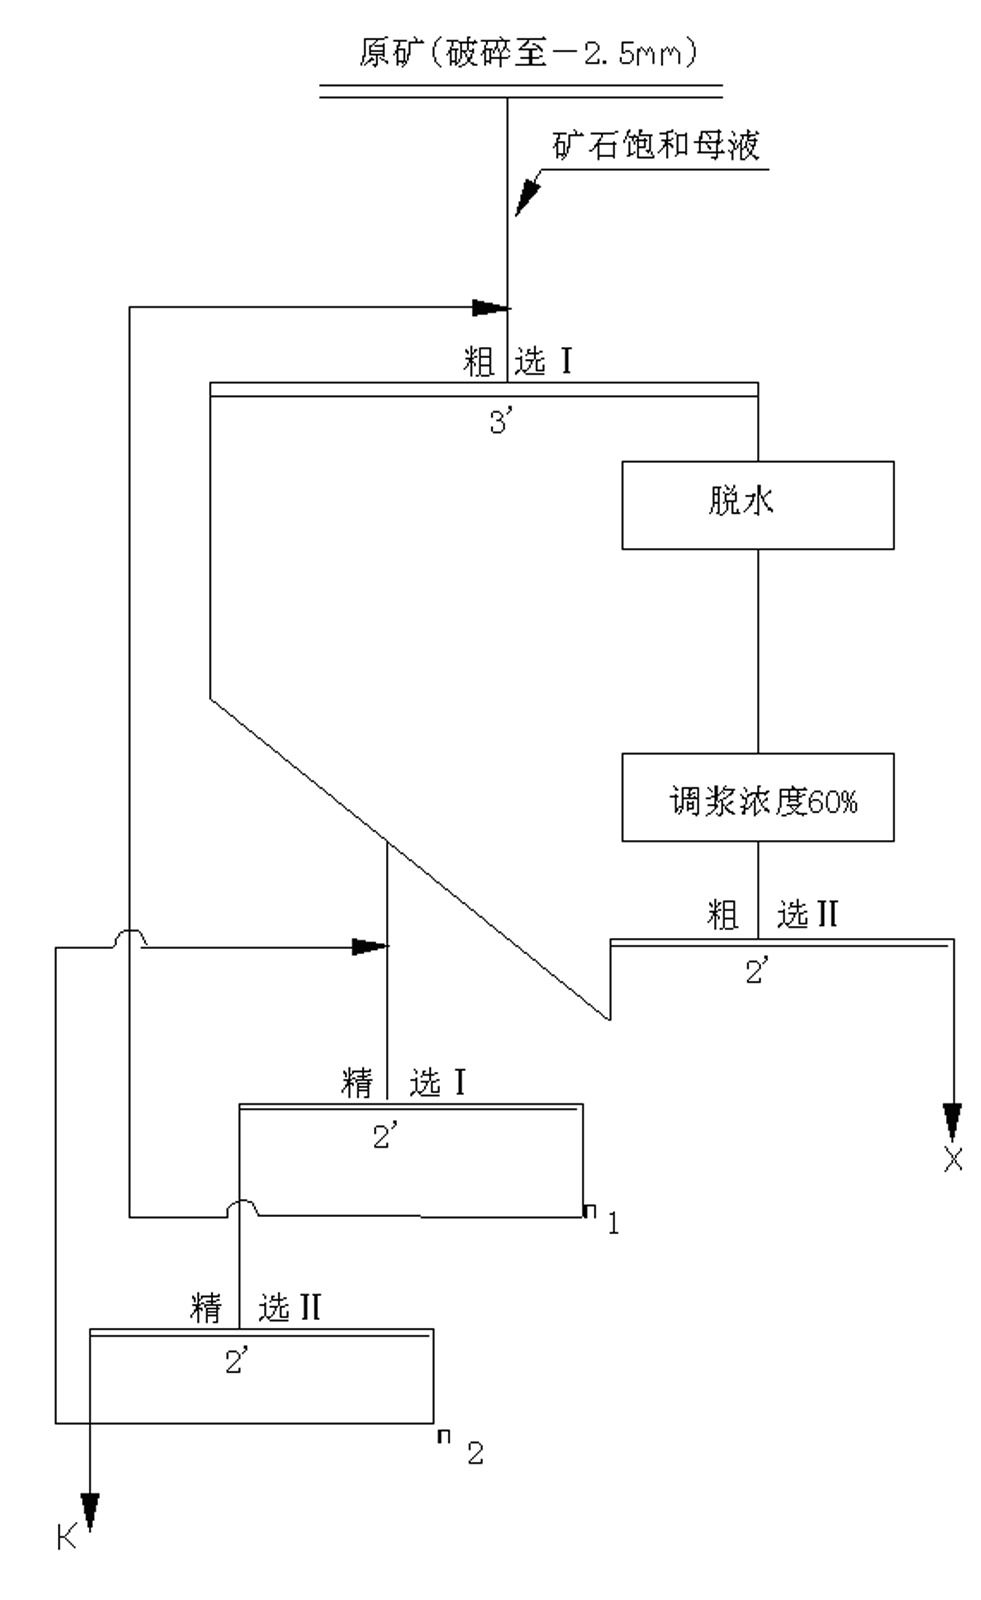 Process for extracting potassium chloride from native sylvite ore